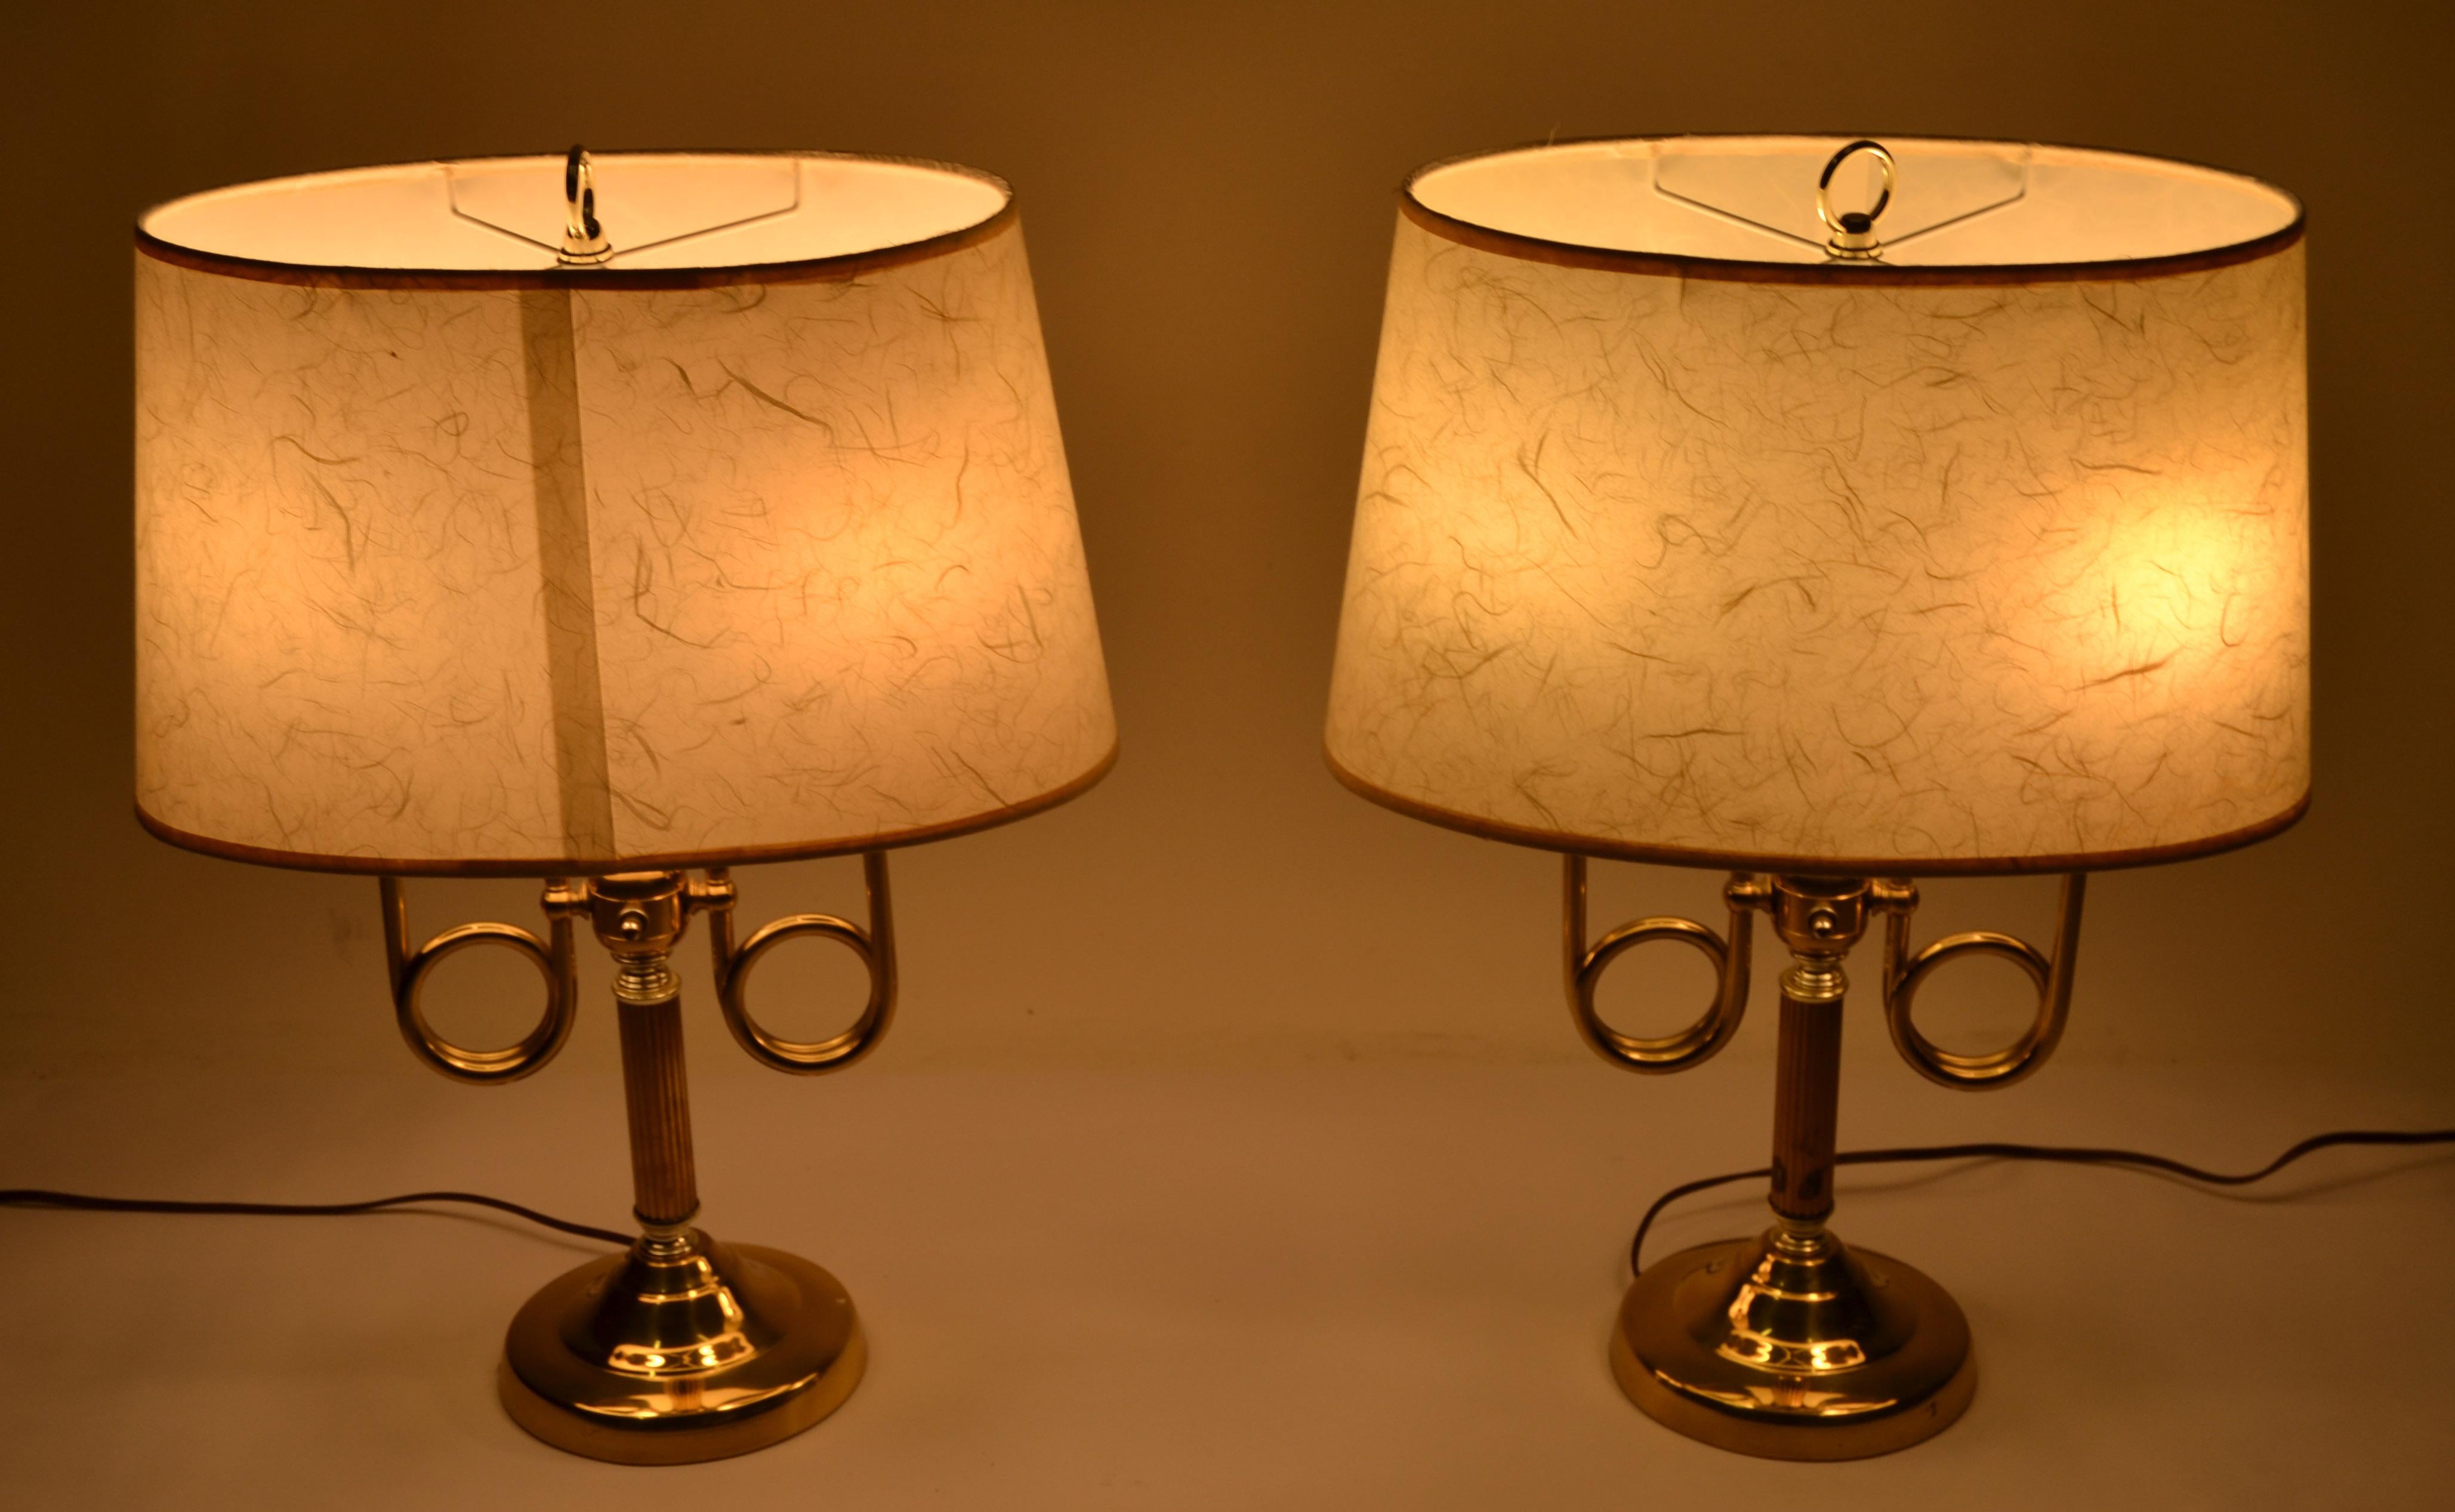 Vintage pair original Alsy solid two patina brass trumpet Bouillotte style, double arm table lamp with oval parchment paper shades.
US Rewiring and each lamp takes 2 light bulbs max. 40 watts.
The original parchment shades have signs of wear, and